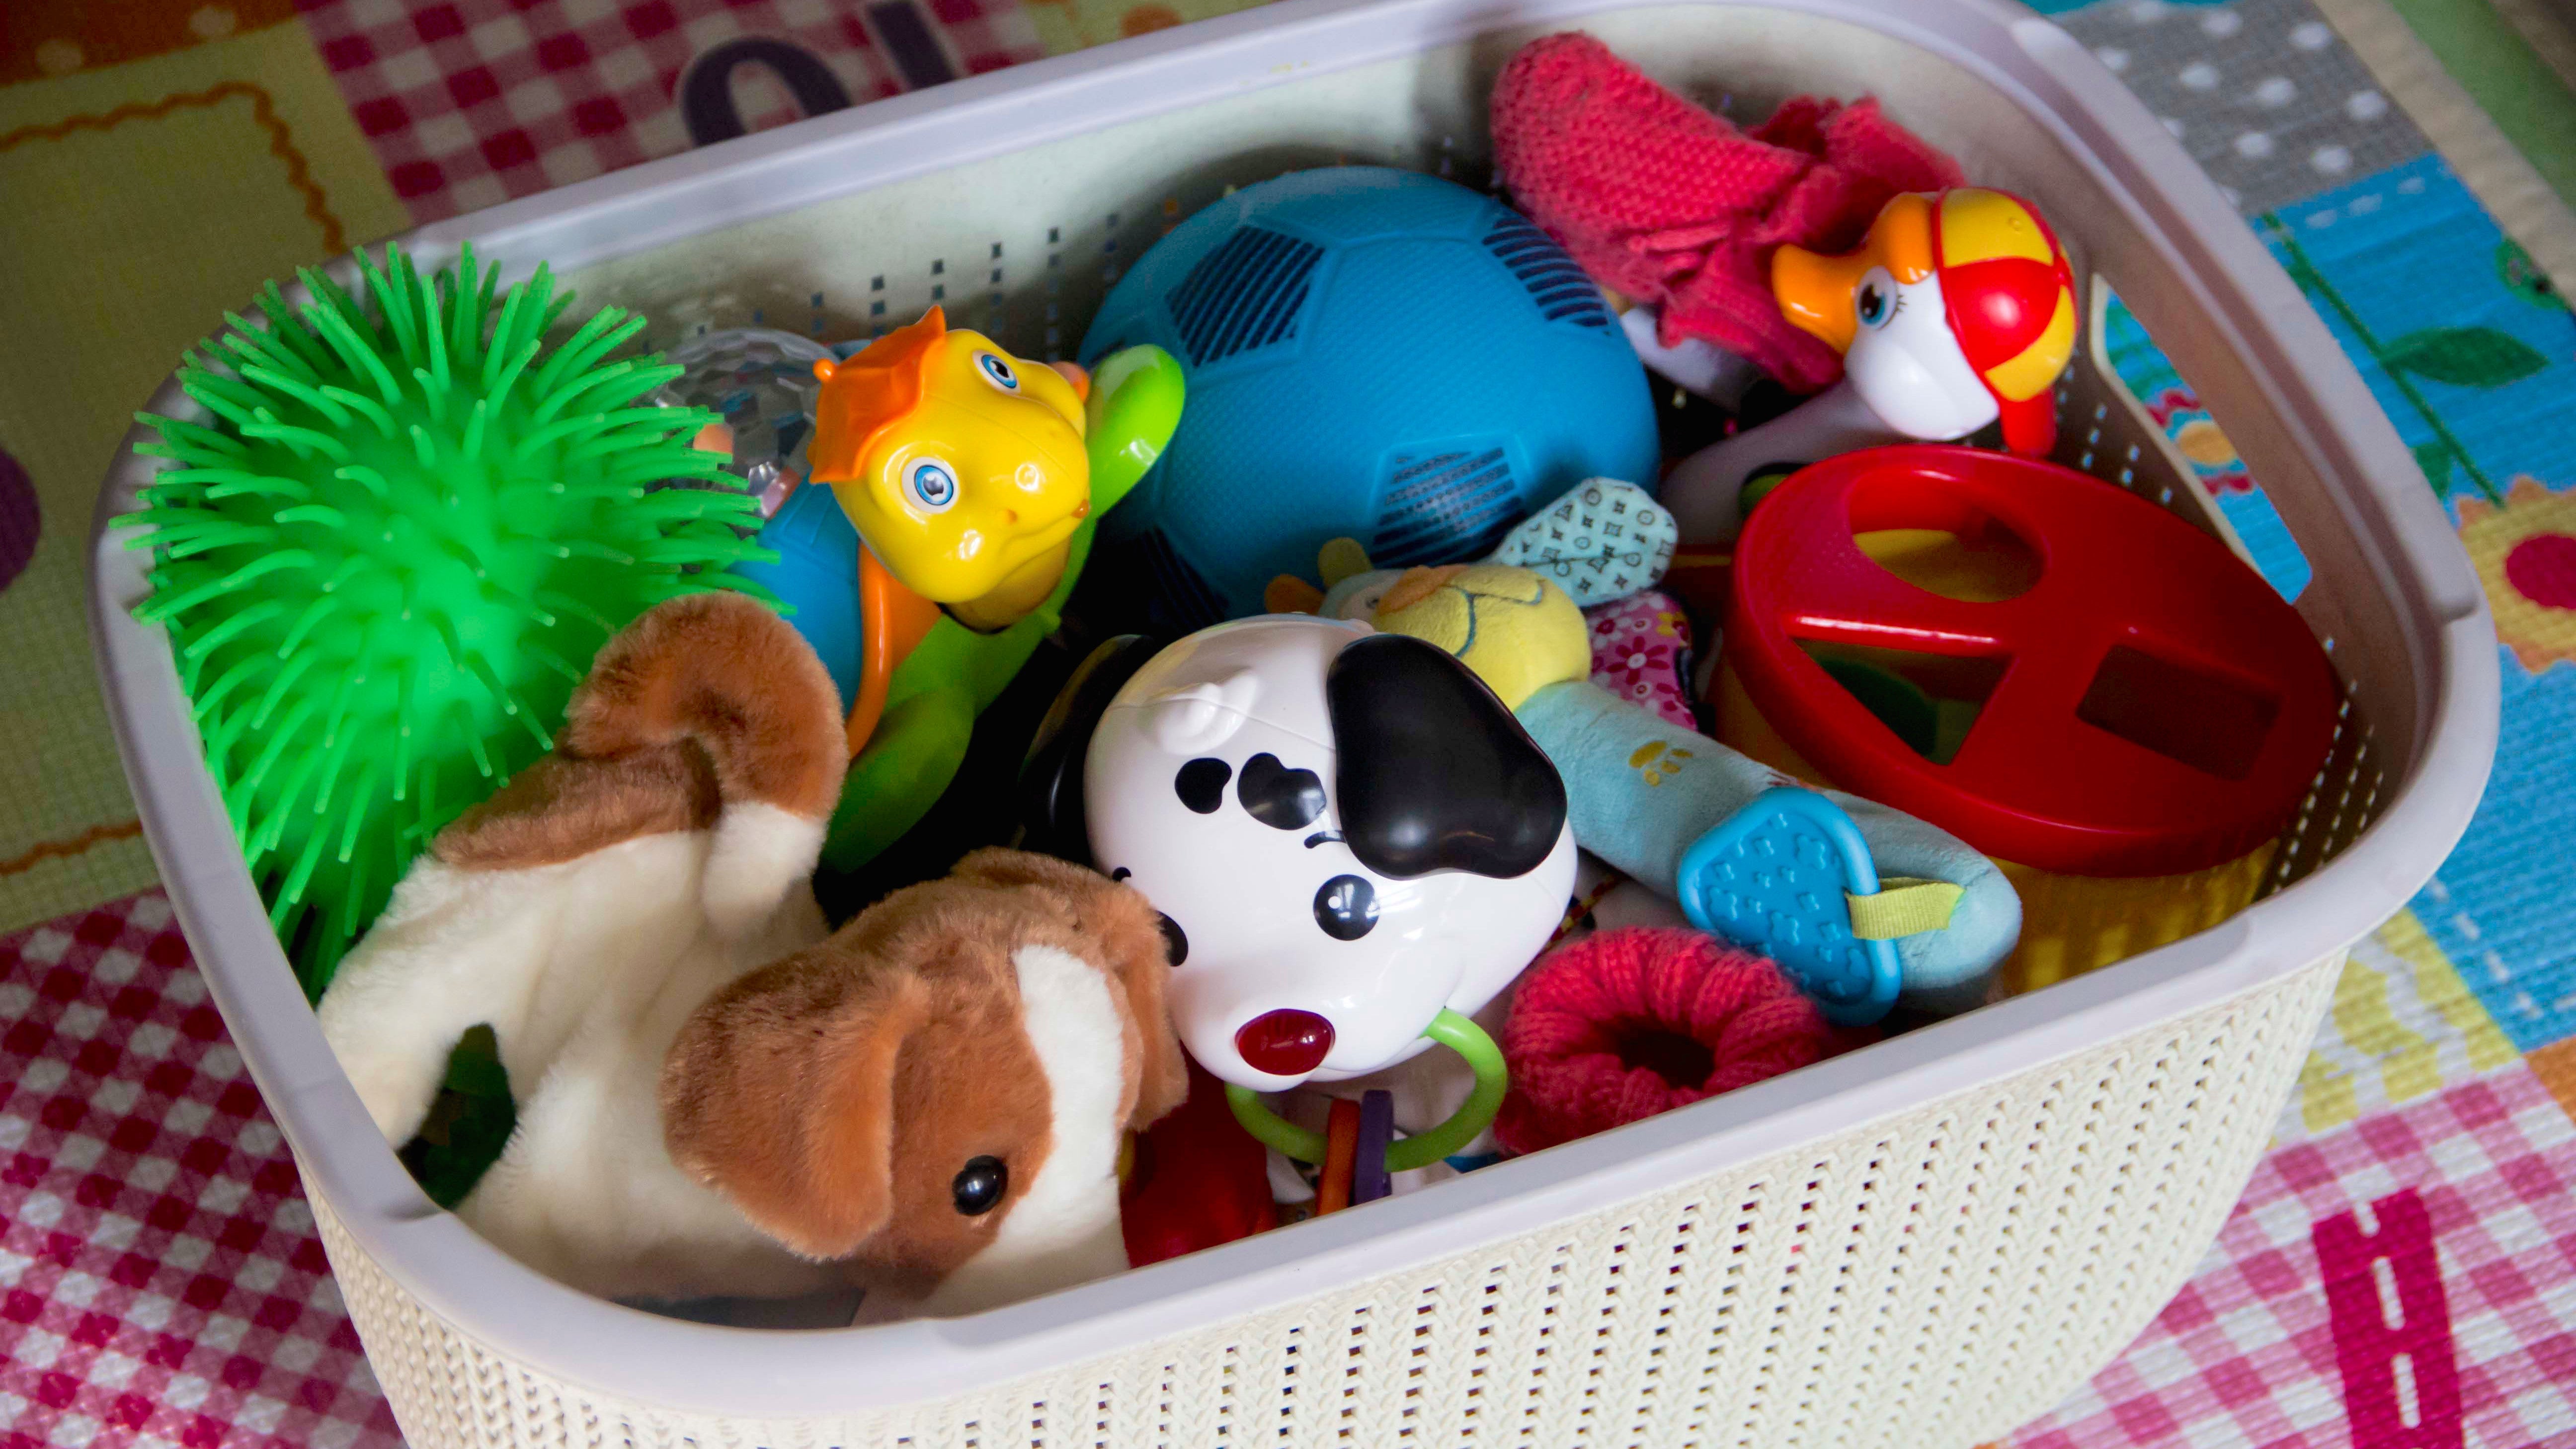 Pack Away Some Of Your Toddler’s New Toys Right Now